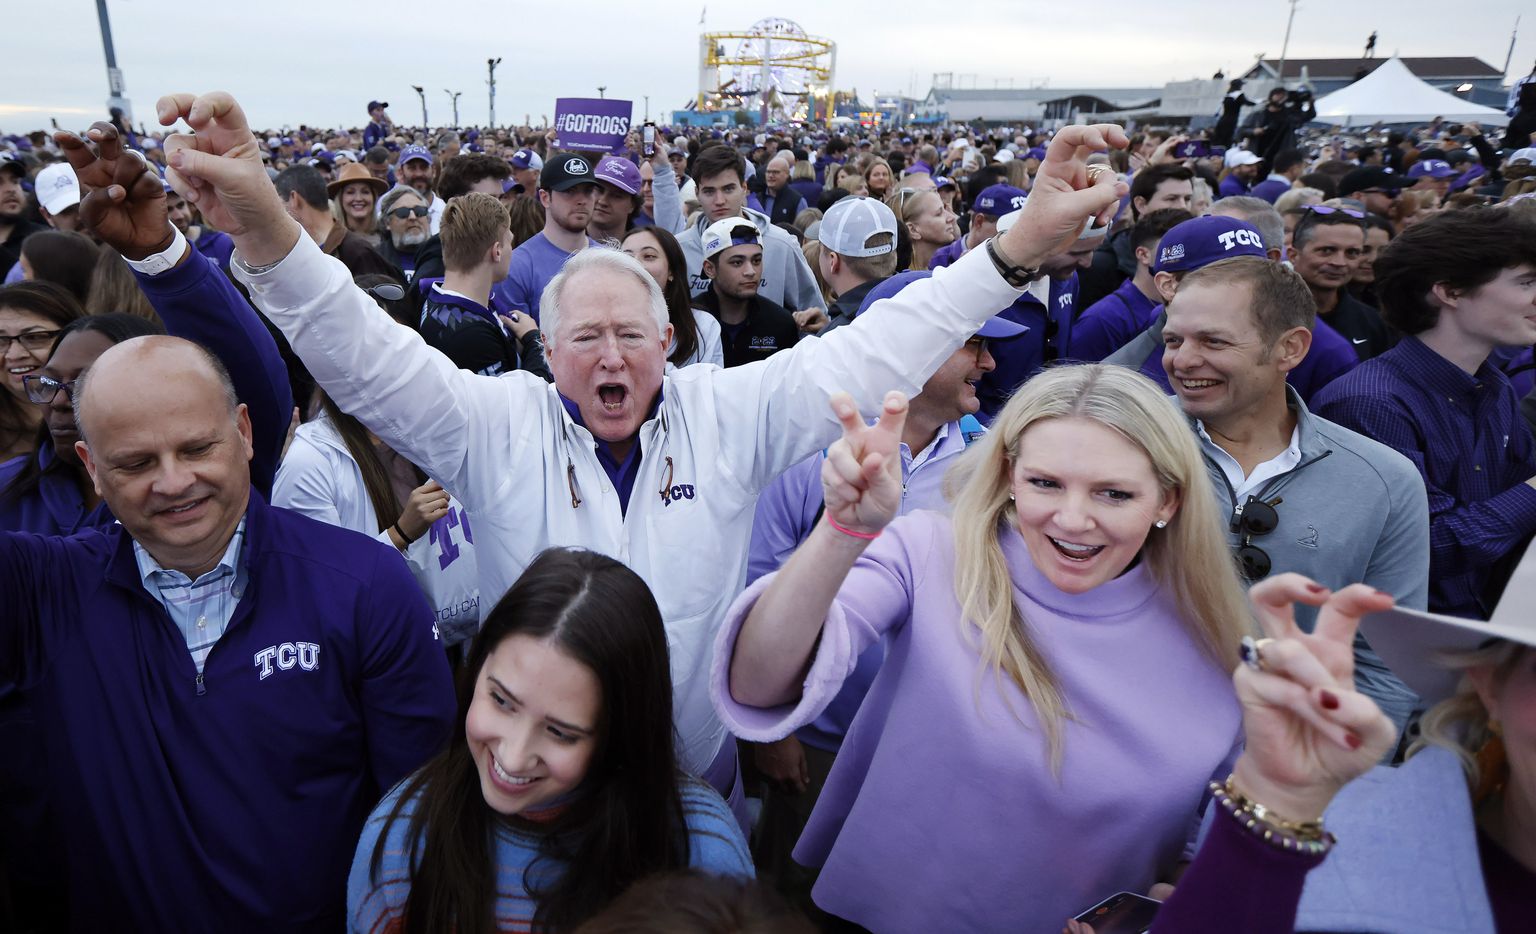 Ahead of the CFP National Championship football game, thousands of TCU Horned Frog fans...